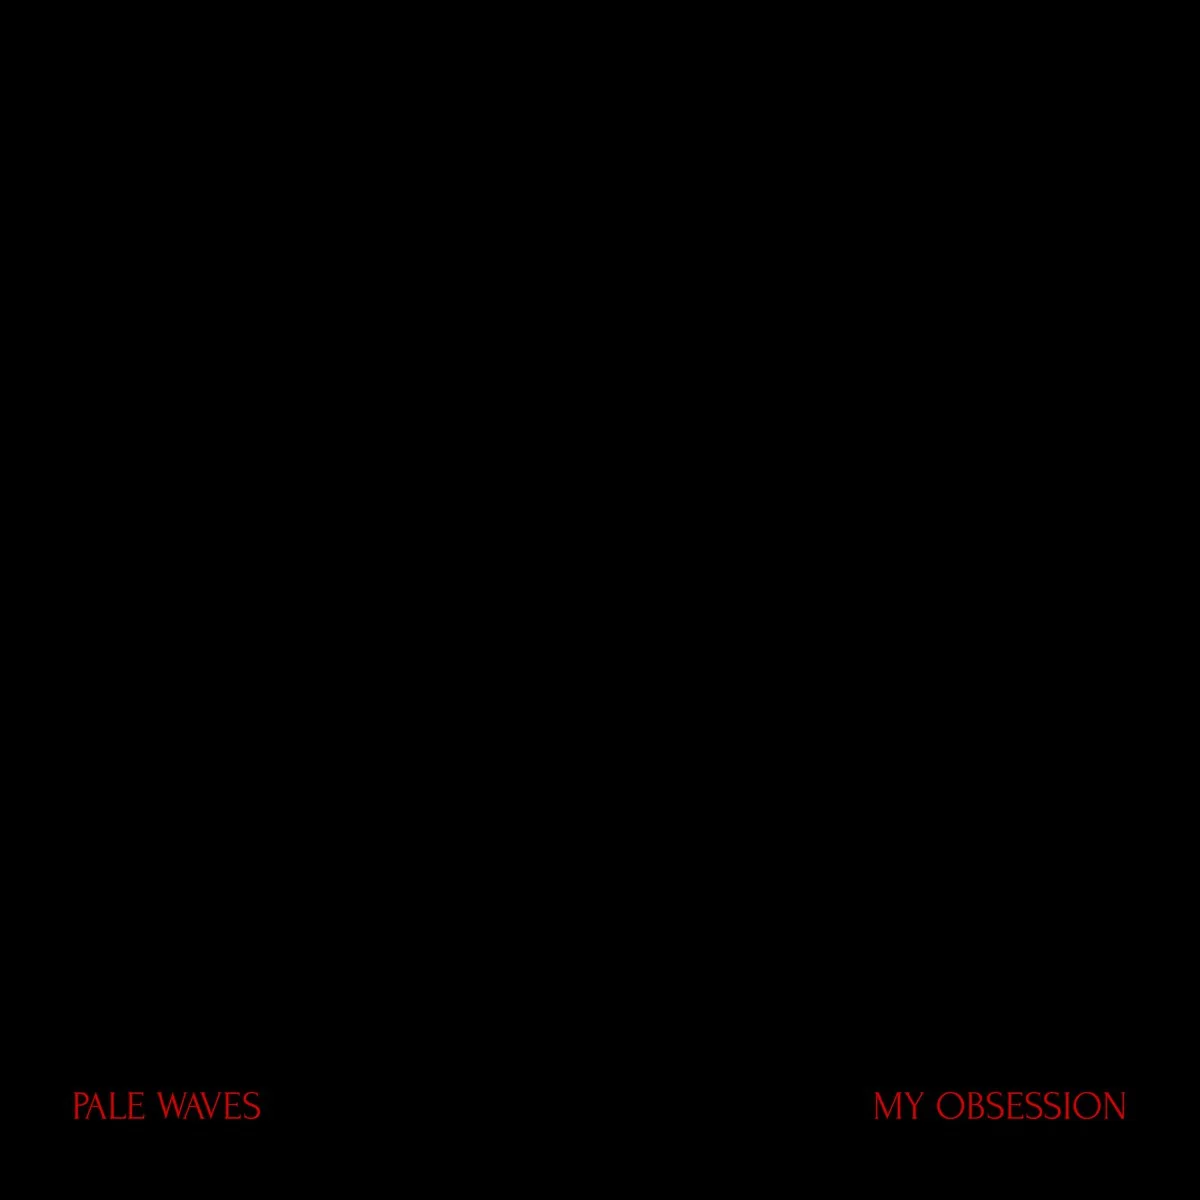 Pale Waves release new single “My Obsession”